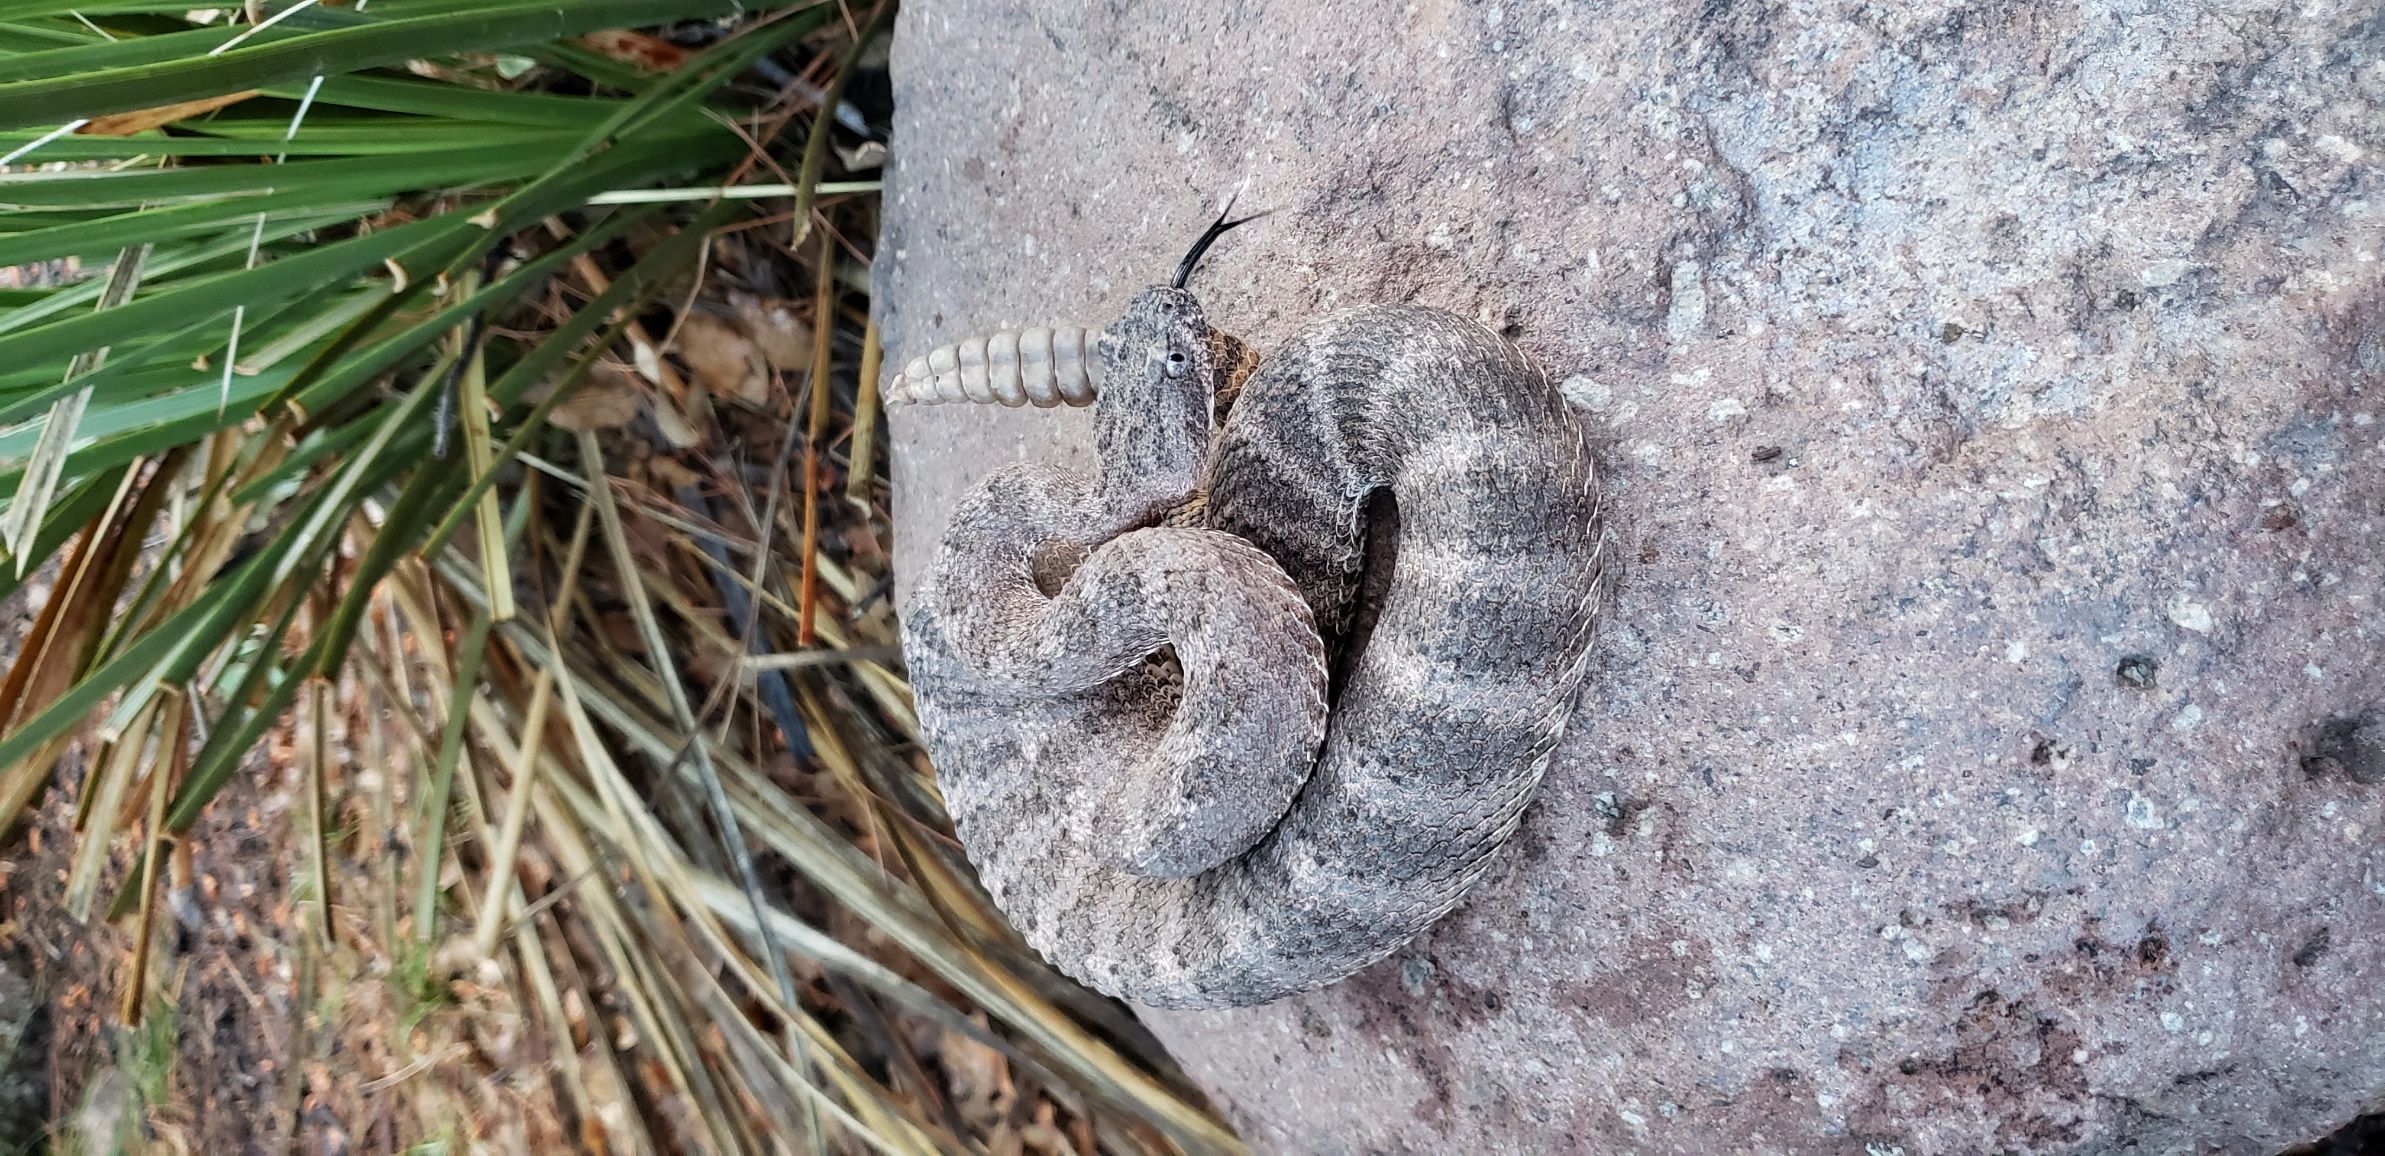 Only recently discovered to be present in New Mexico, this individual is one of only a few tiger rattlesnakes to have been found in the Peloncillo Mountains of Hidalgo County. 